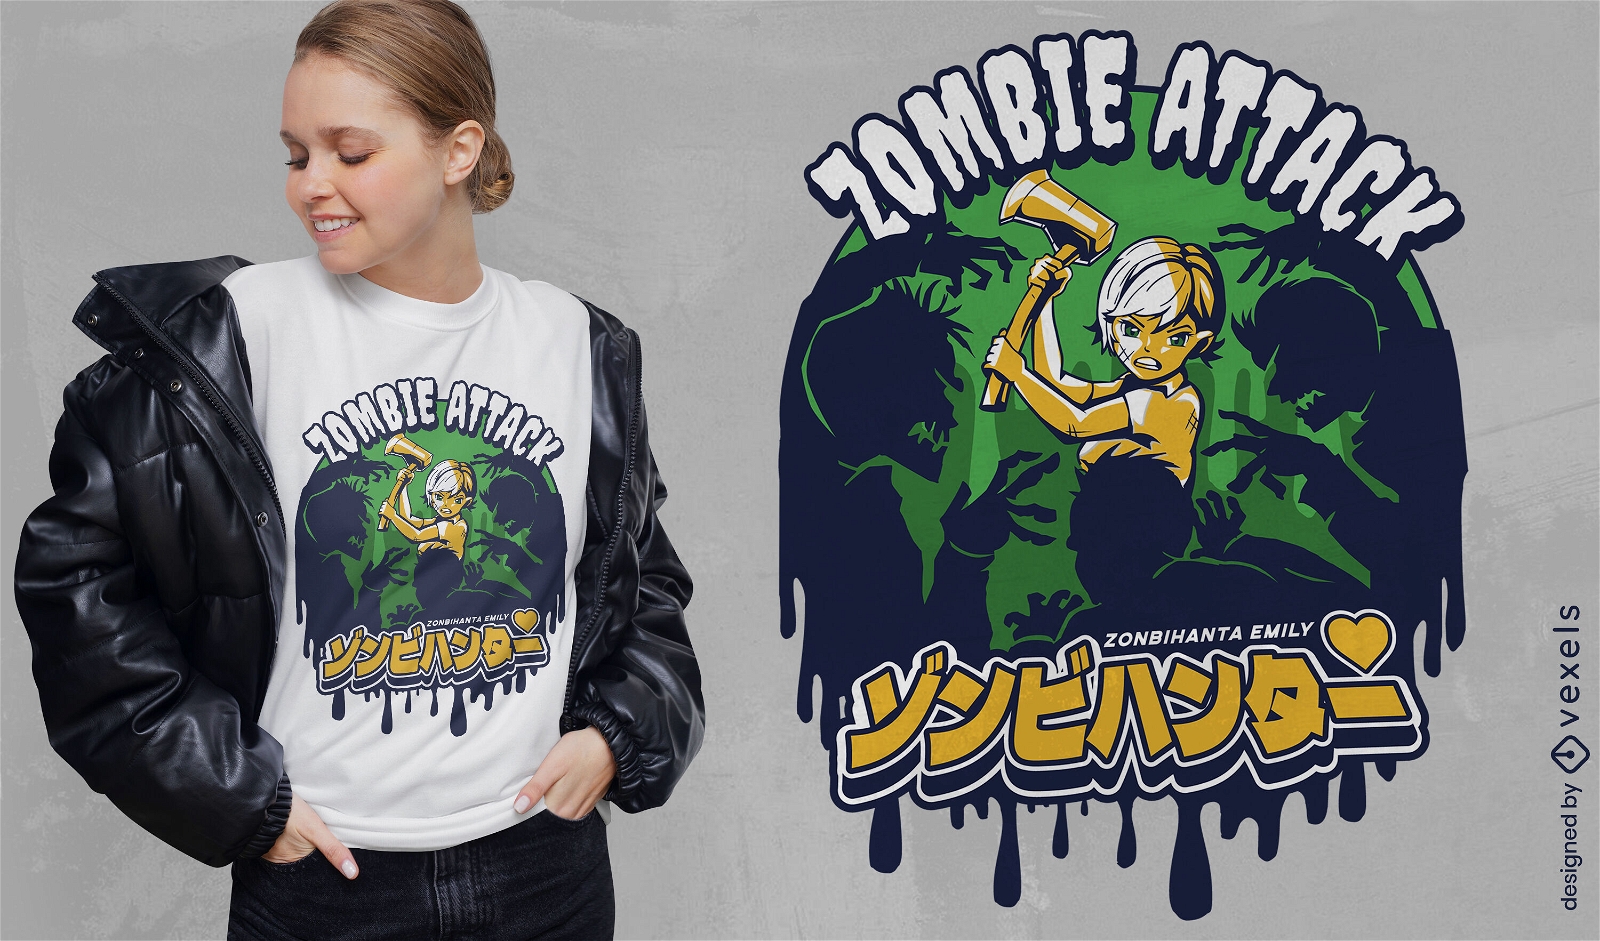 Anime zombie attack t-shirt design